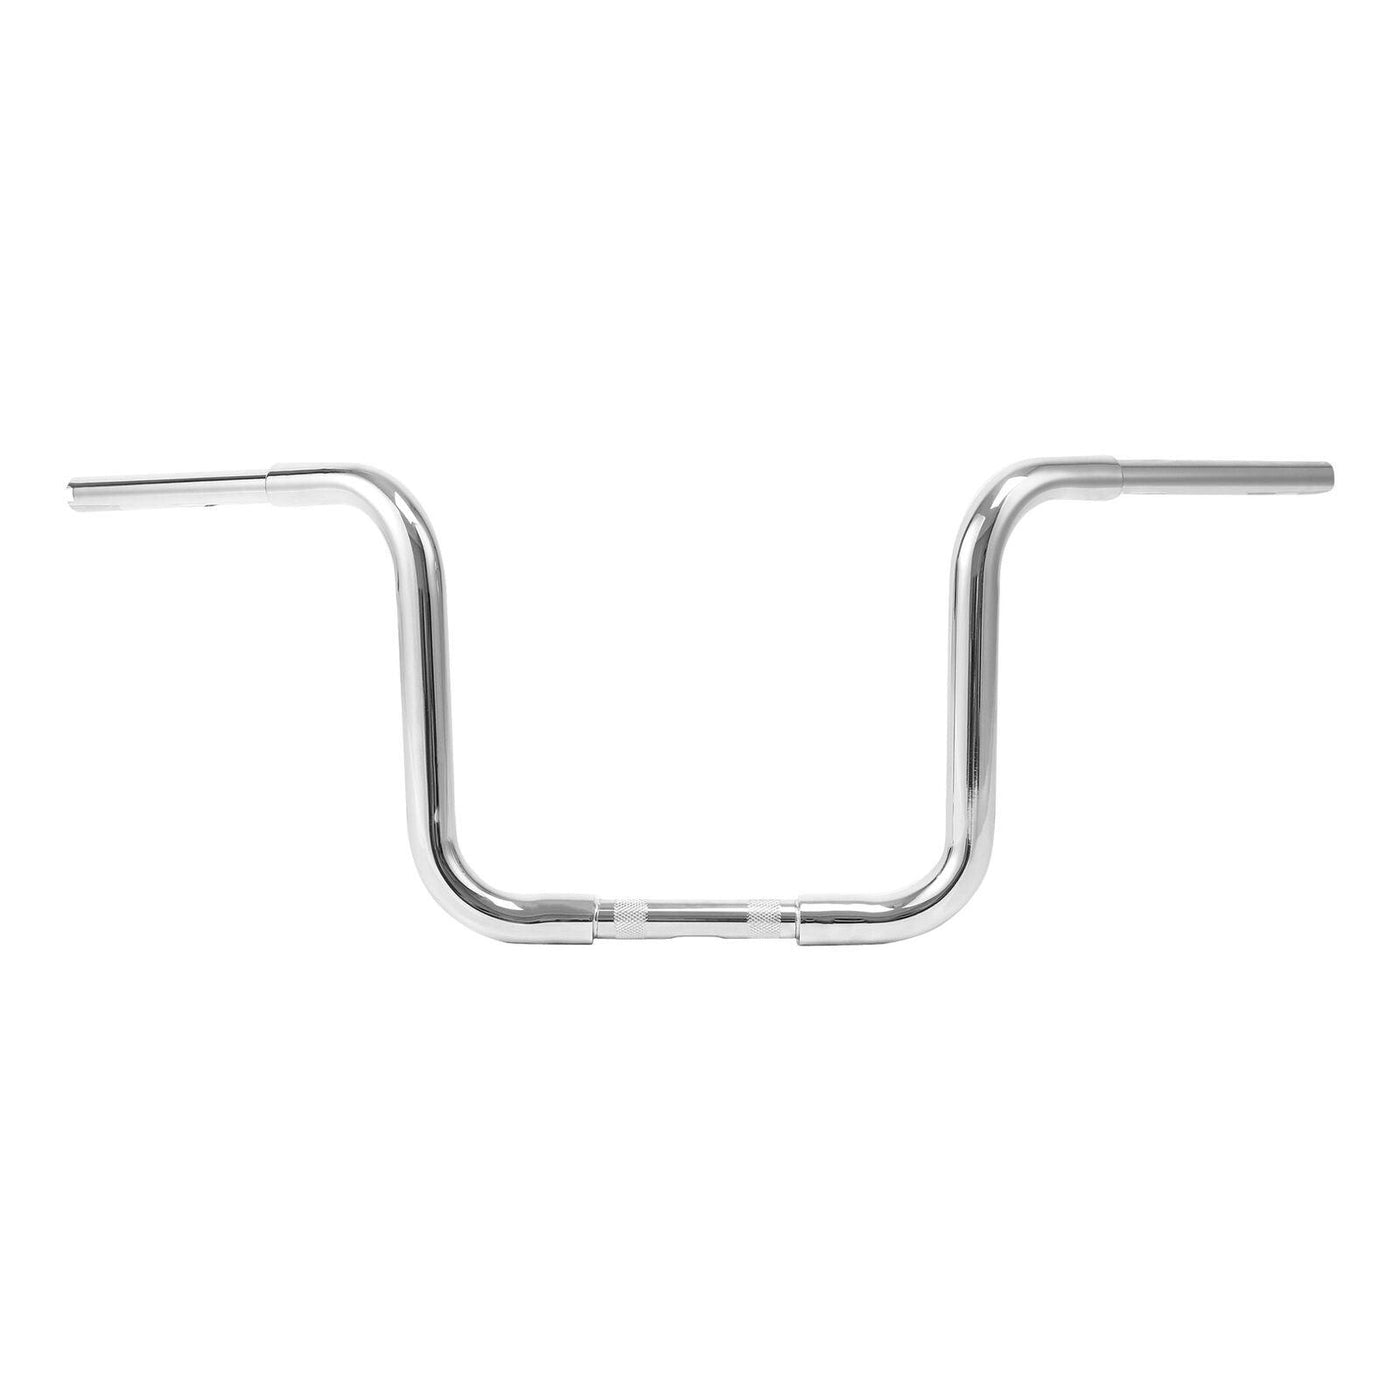 12" Rise Ape Hangers Handlebar Fit For Harley Sportster Dyna Touring Road King - Moto Life Products